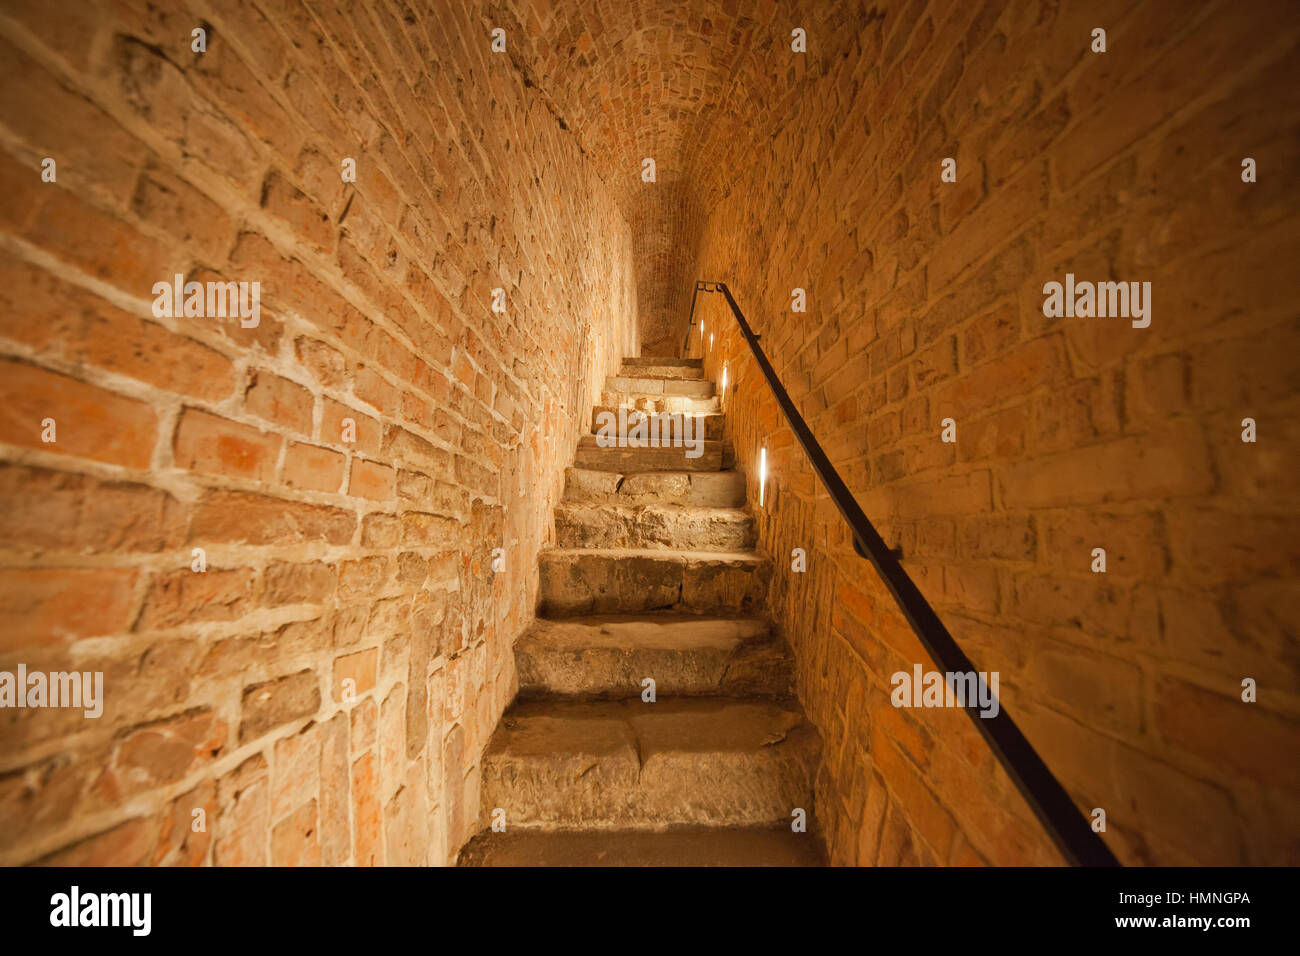 Narrow staircase old brick arched long corridor in Royal Castle of Warsaw in Poland, Europe Stock Photo